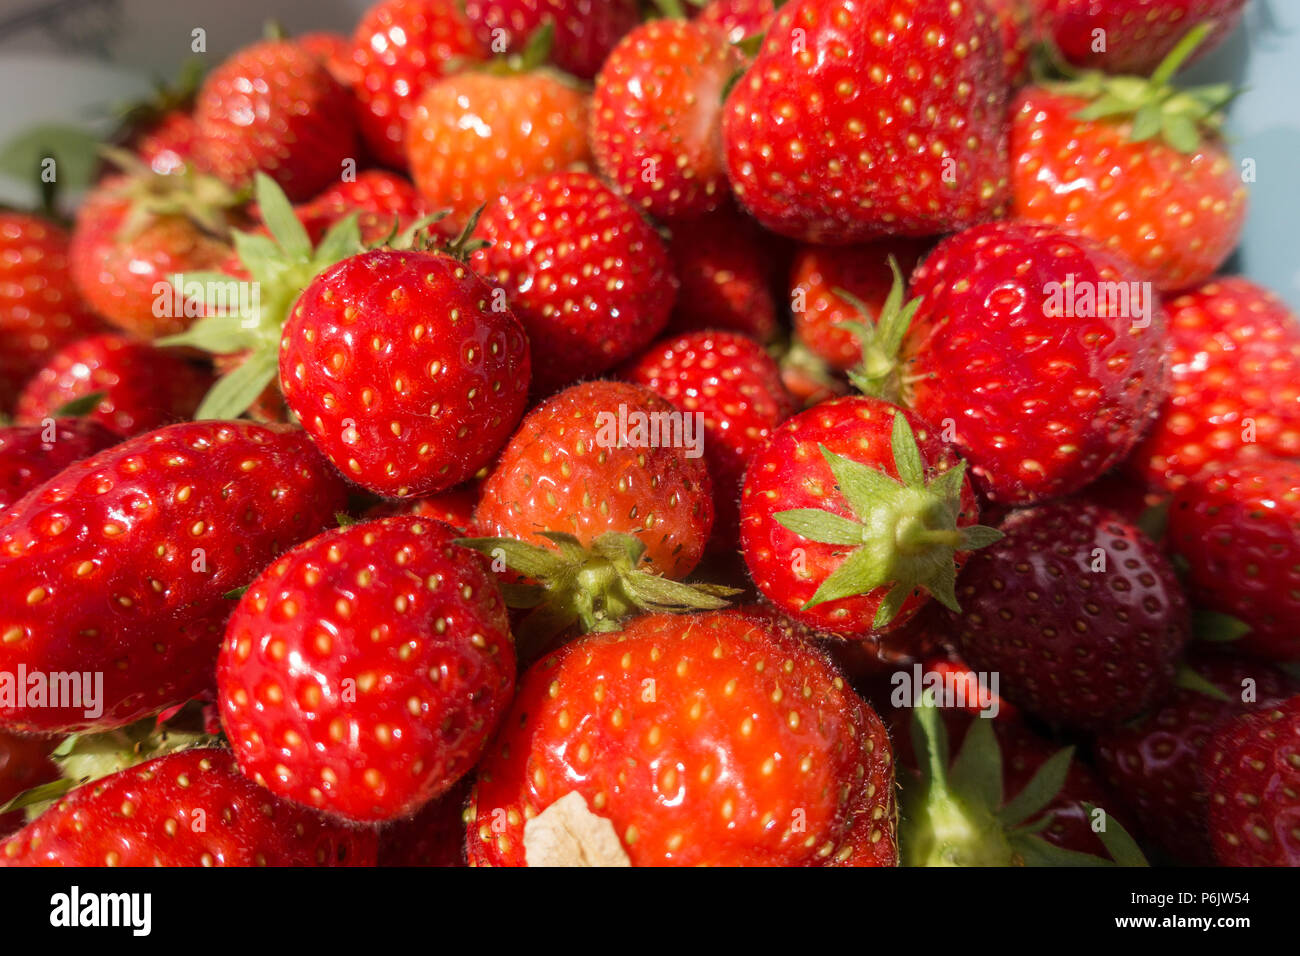 A close up view of ripe red strawberries. Stock Photo